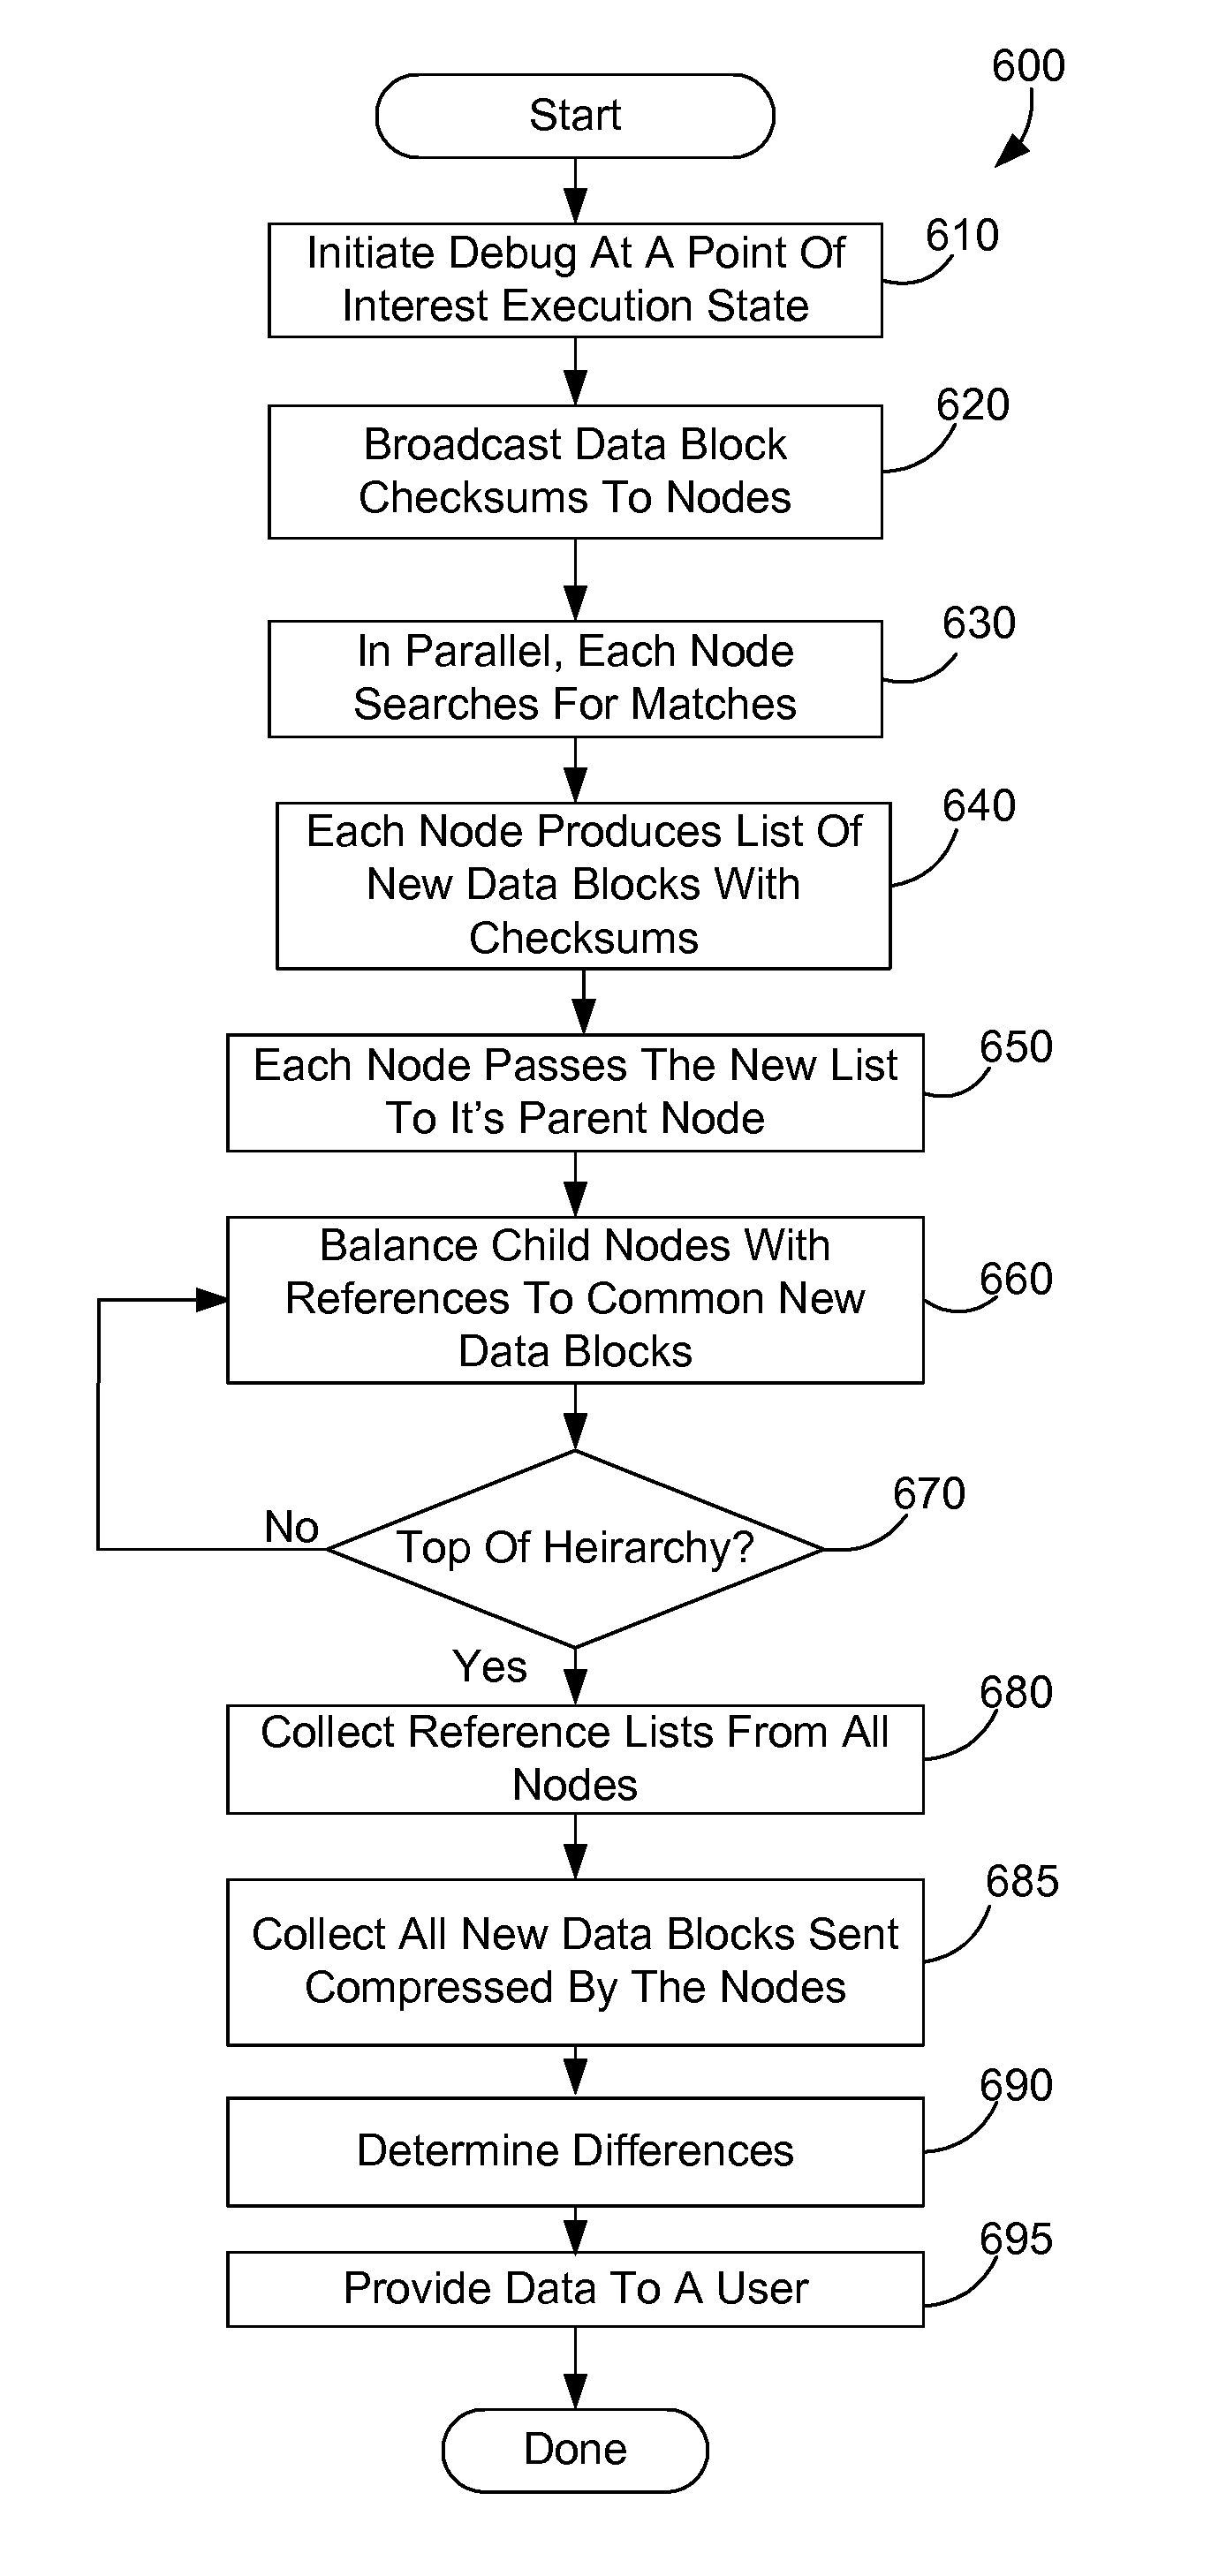 Parallel debugging in a massively parallel computing system